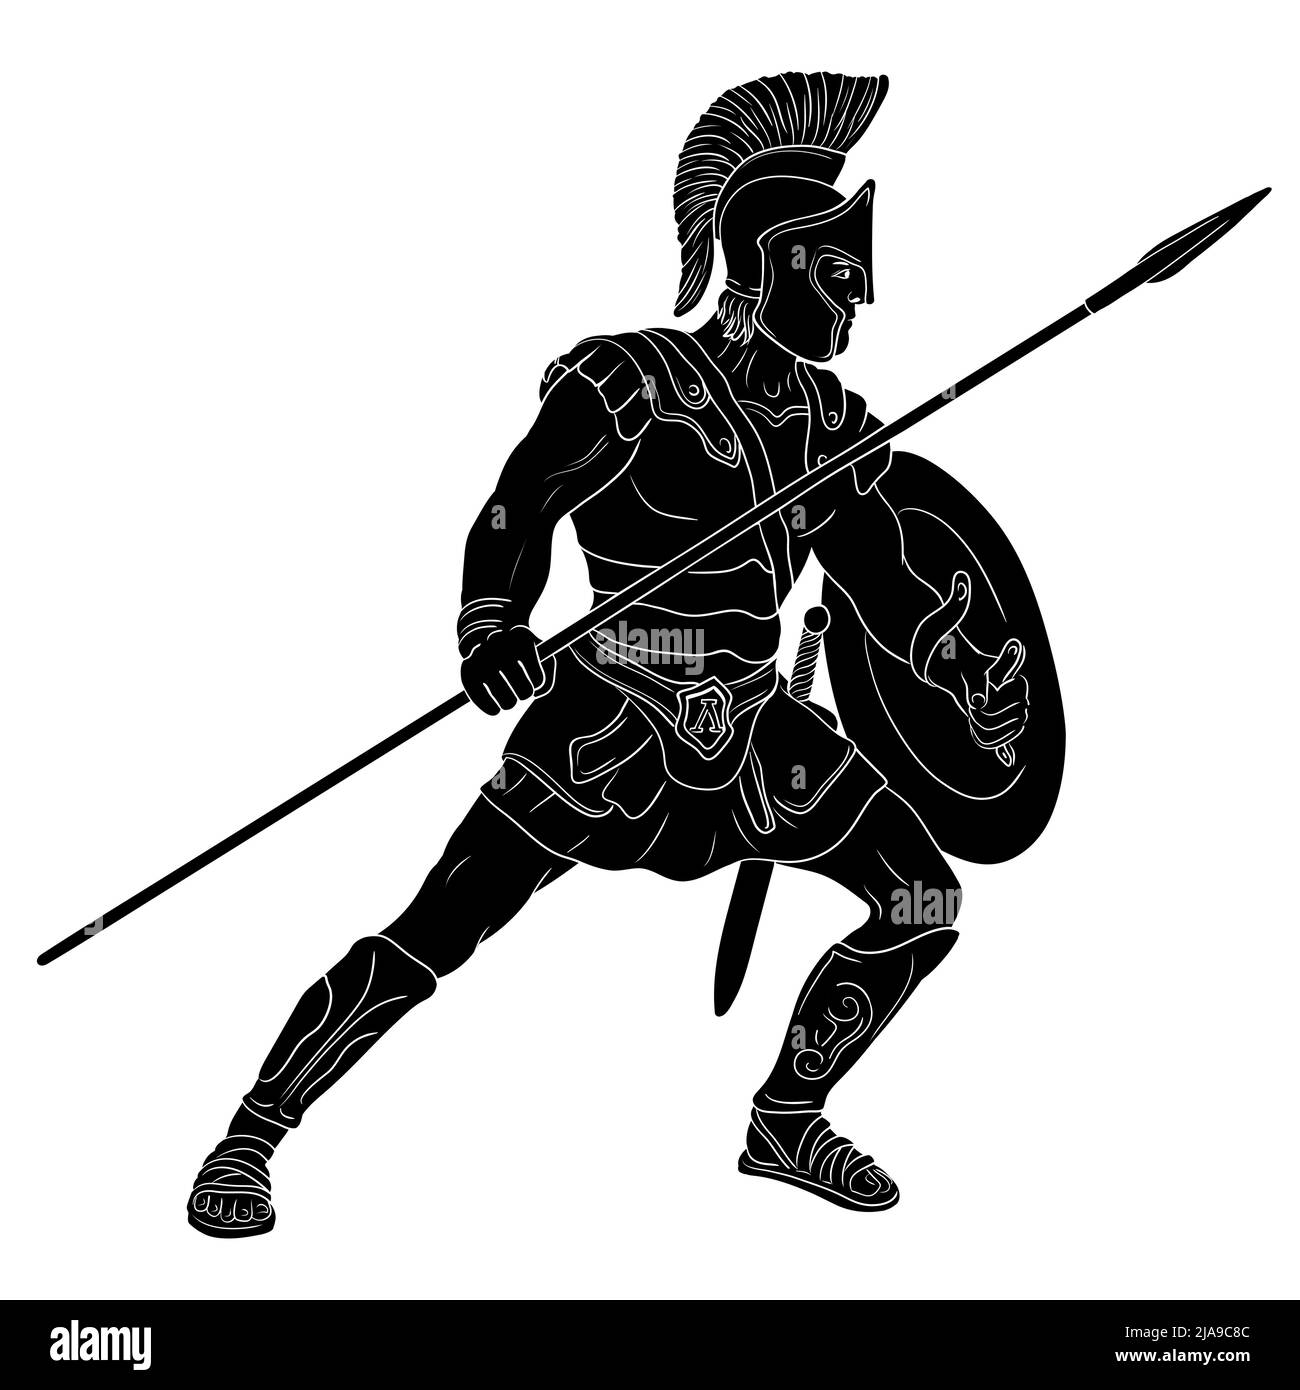 Ancient Roman warrior with a spear and shield in his hands is standing ready to attack. Vector illustration isolated on white background. Stock Vector